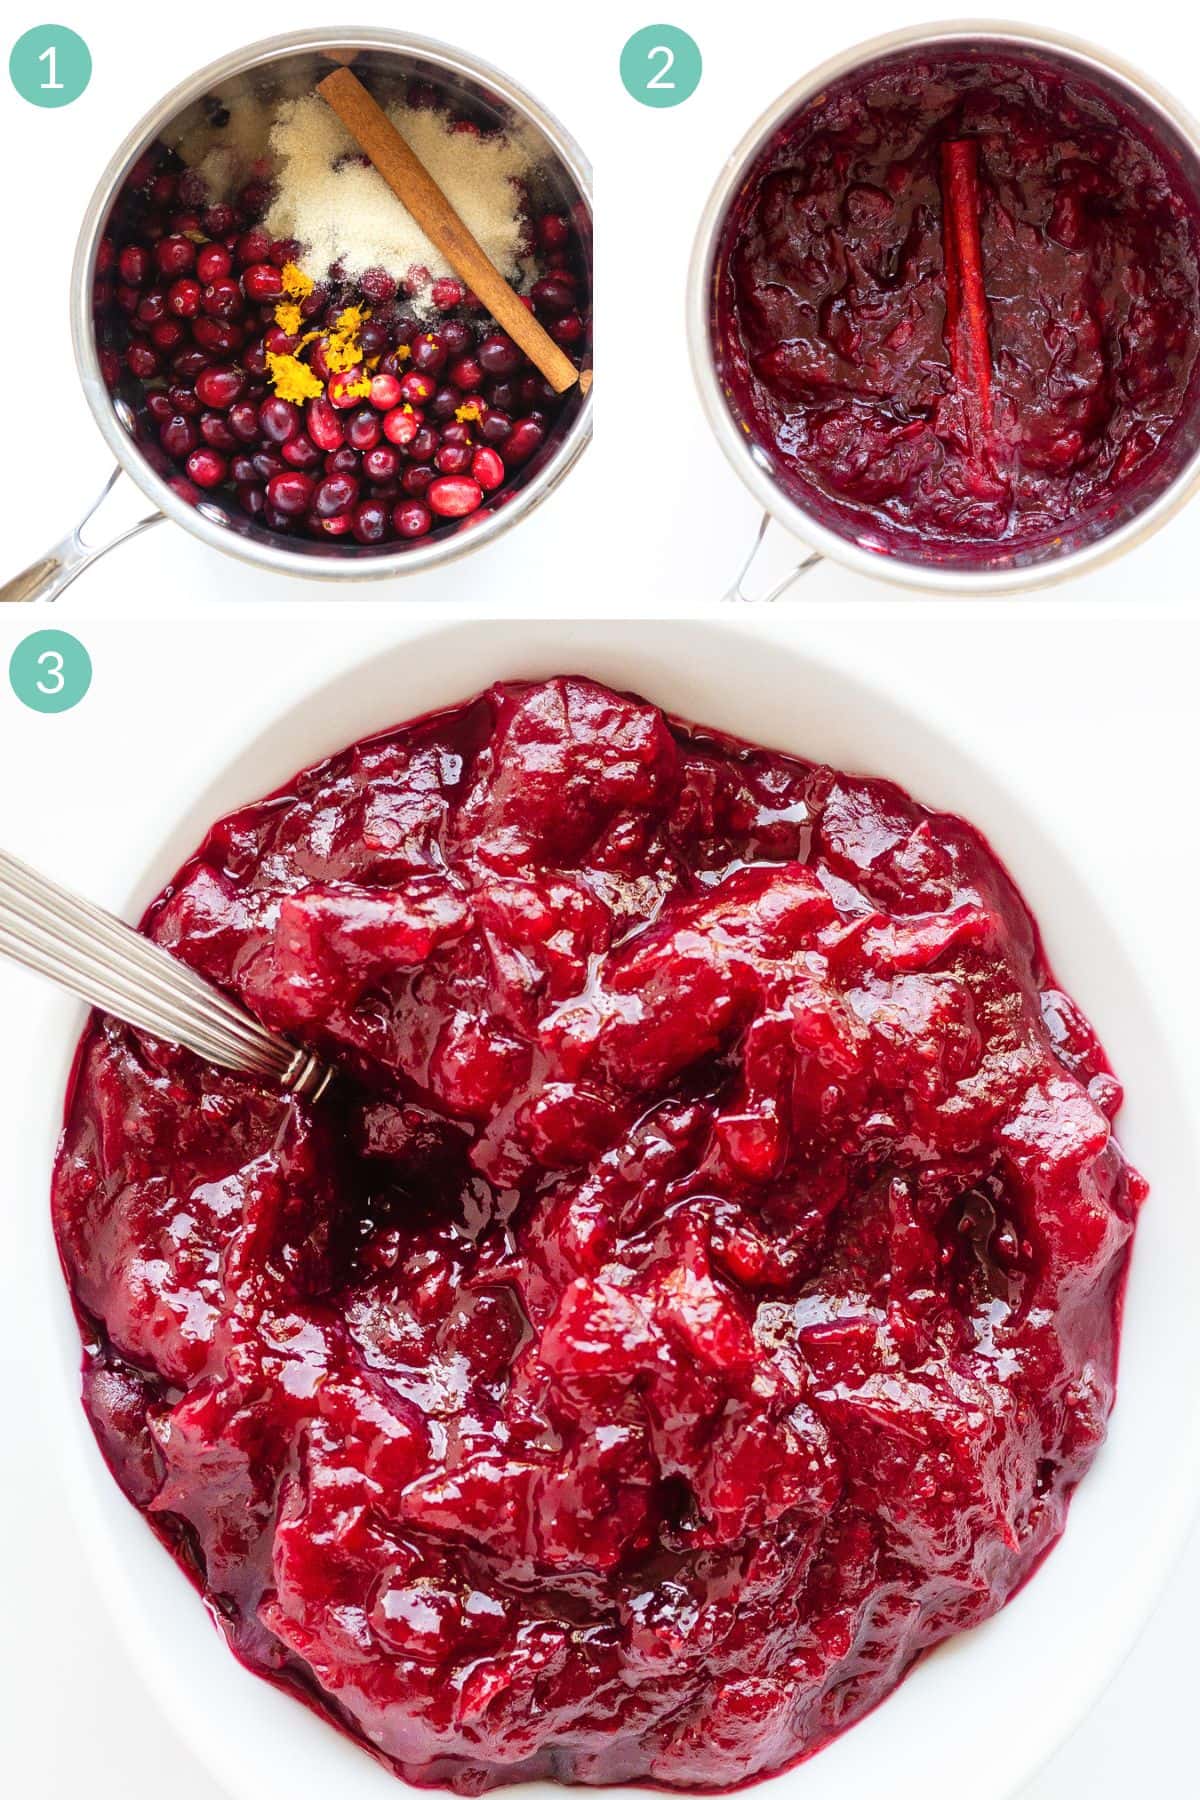 Numbered graphic showing steps to make homemade cranberry sauce.